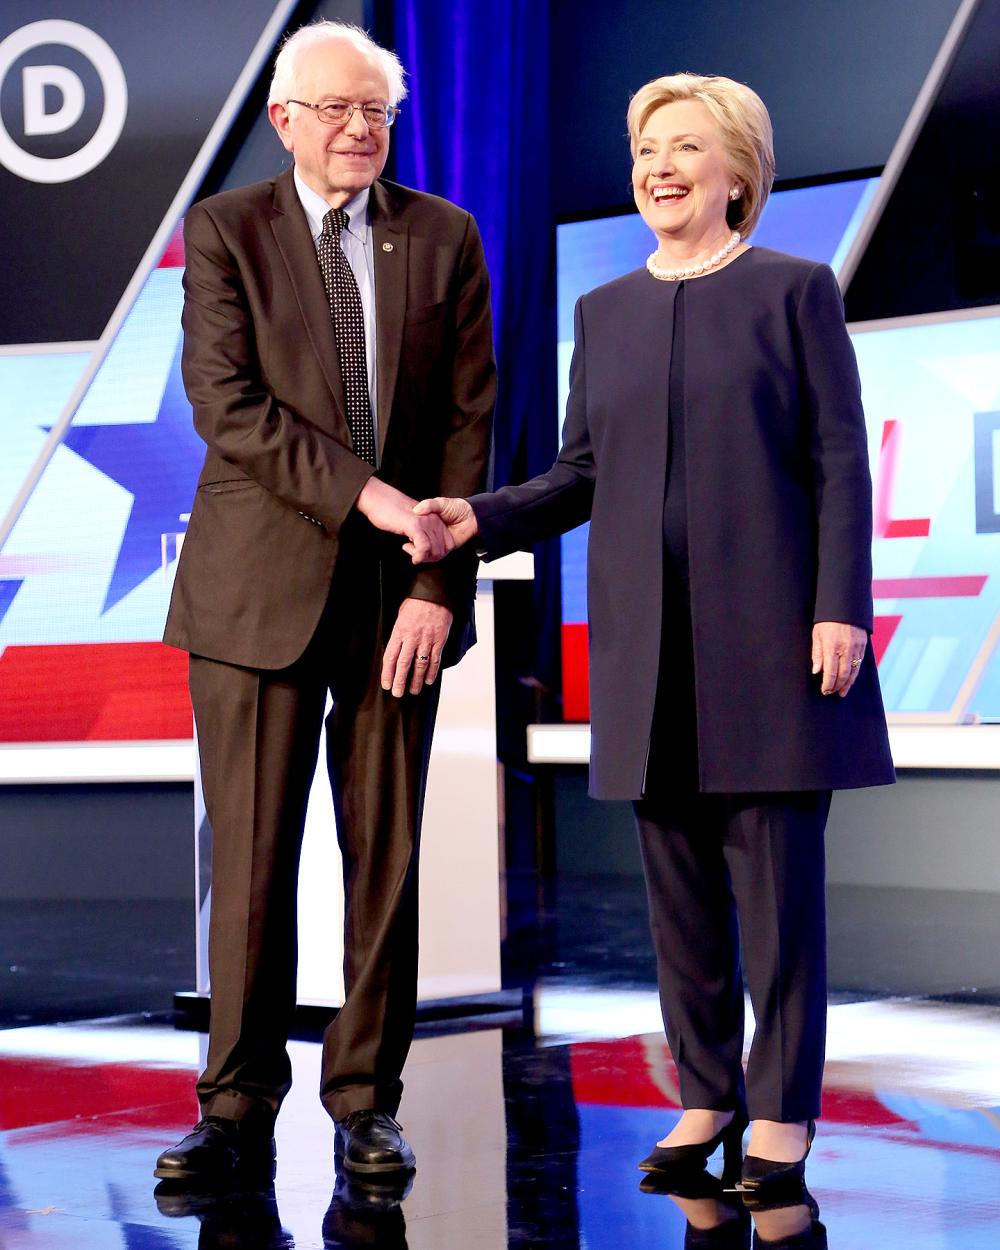 Bernie Sanders and Hillary Clinton are seen before the Univision News and Washington Post Democratic Presidential Primary Debate on the Miami Dade College Kendall Campus on March 9, 2016, in Miami.